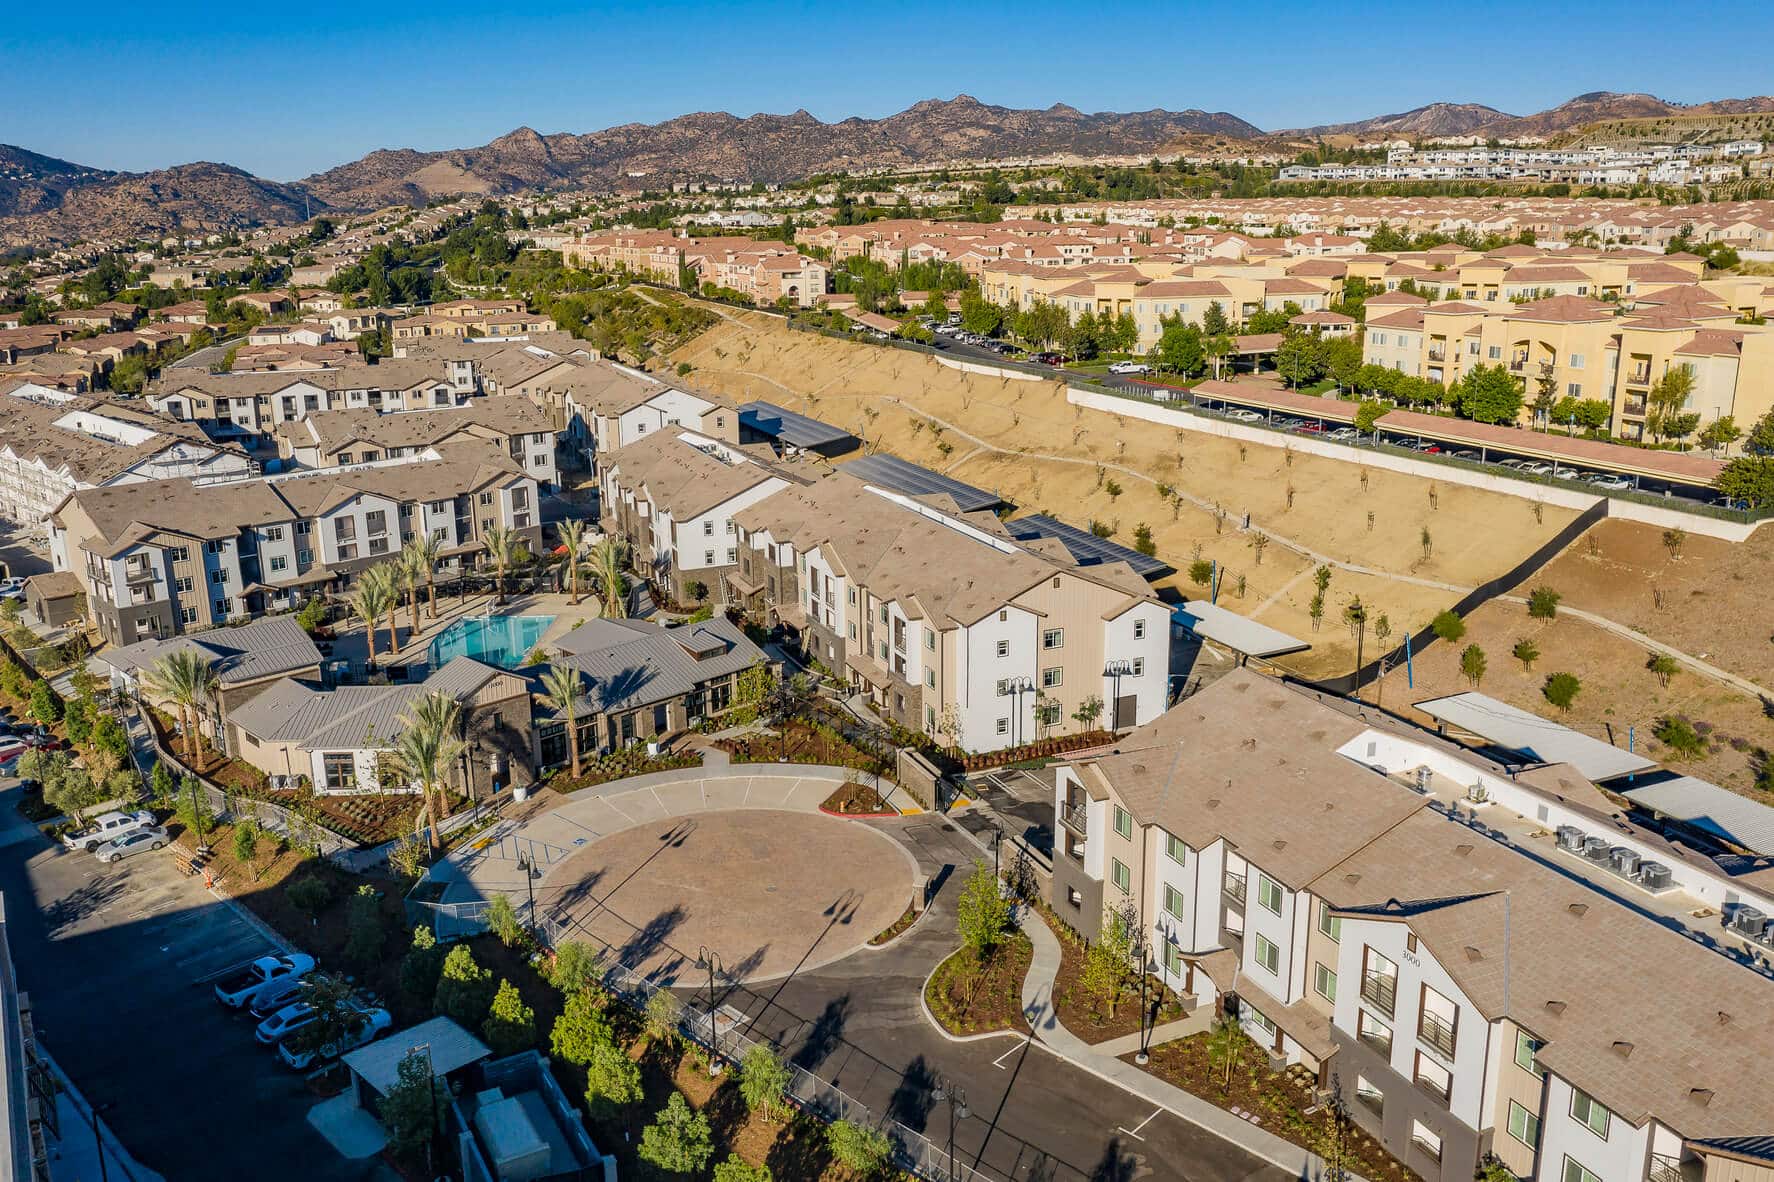 Residential and nonresidential buildings at Porter Ranch